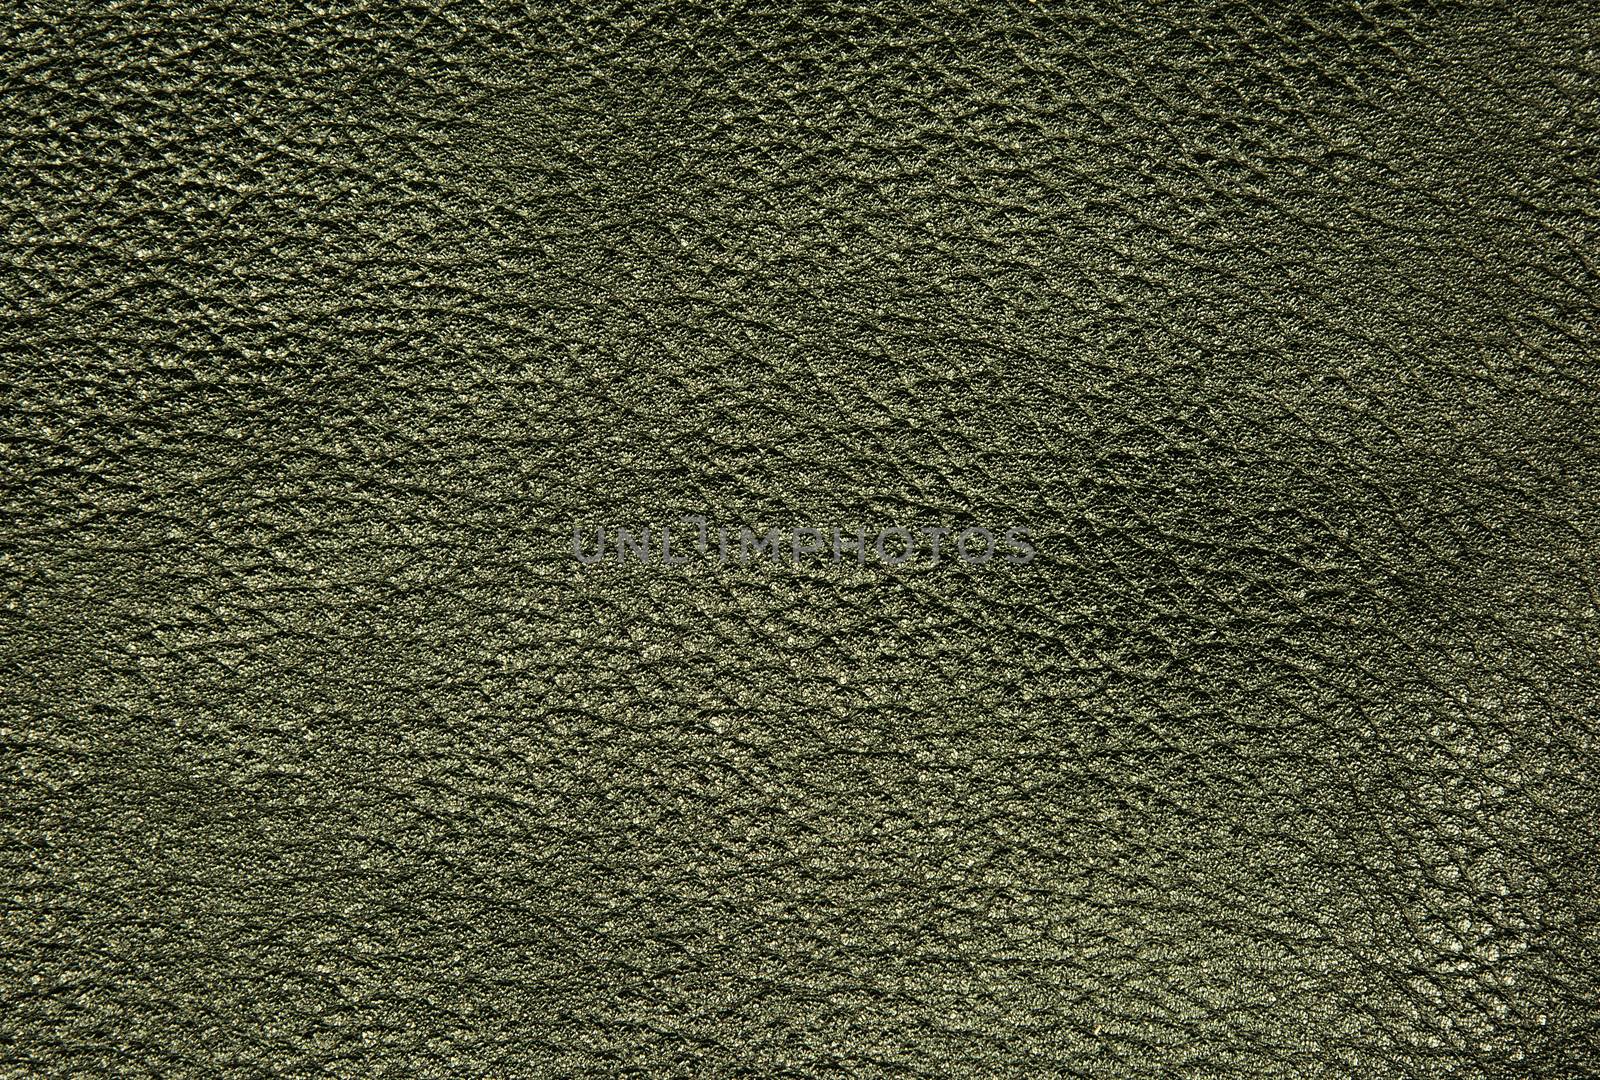 Close Up photo texture of natural black leather with clearly visible fibers, interesting background and texture. horizontal view